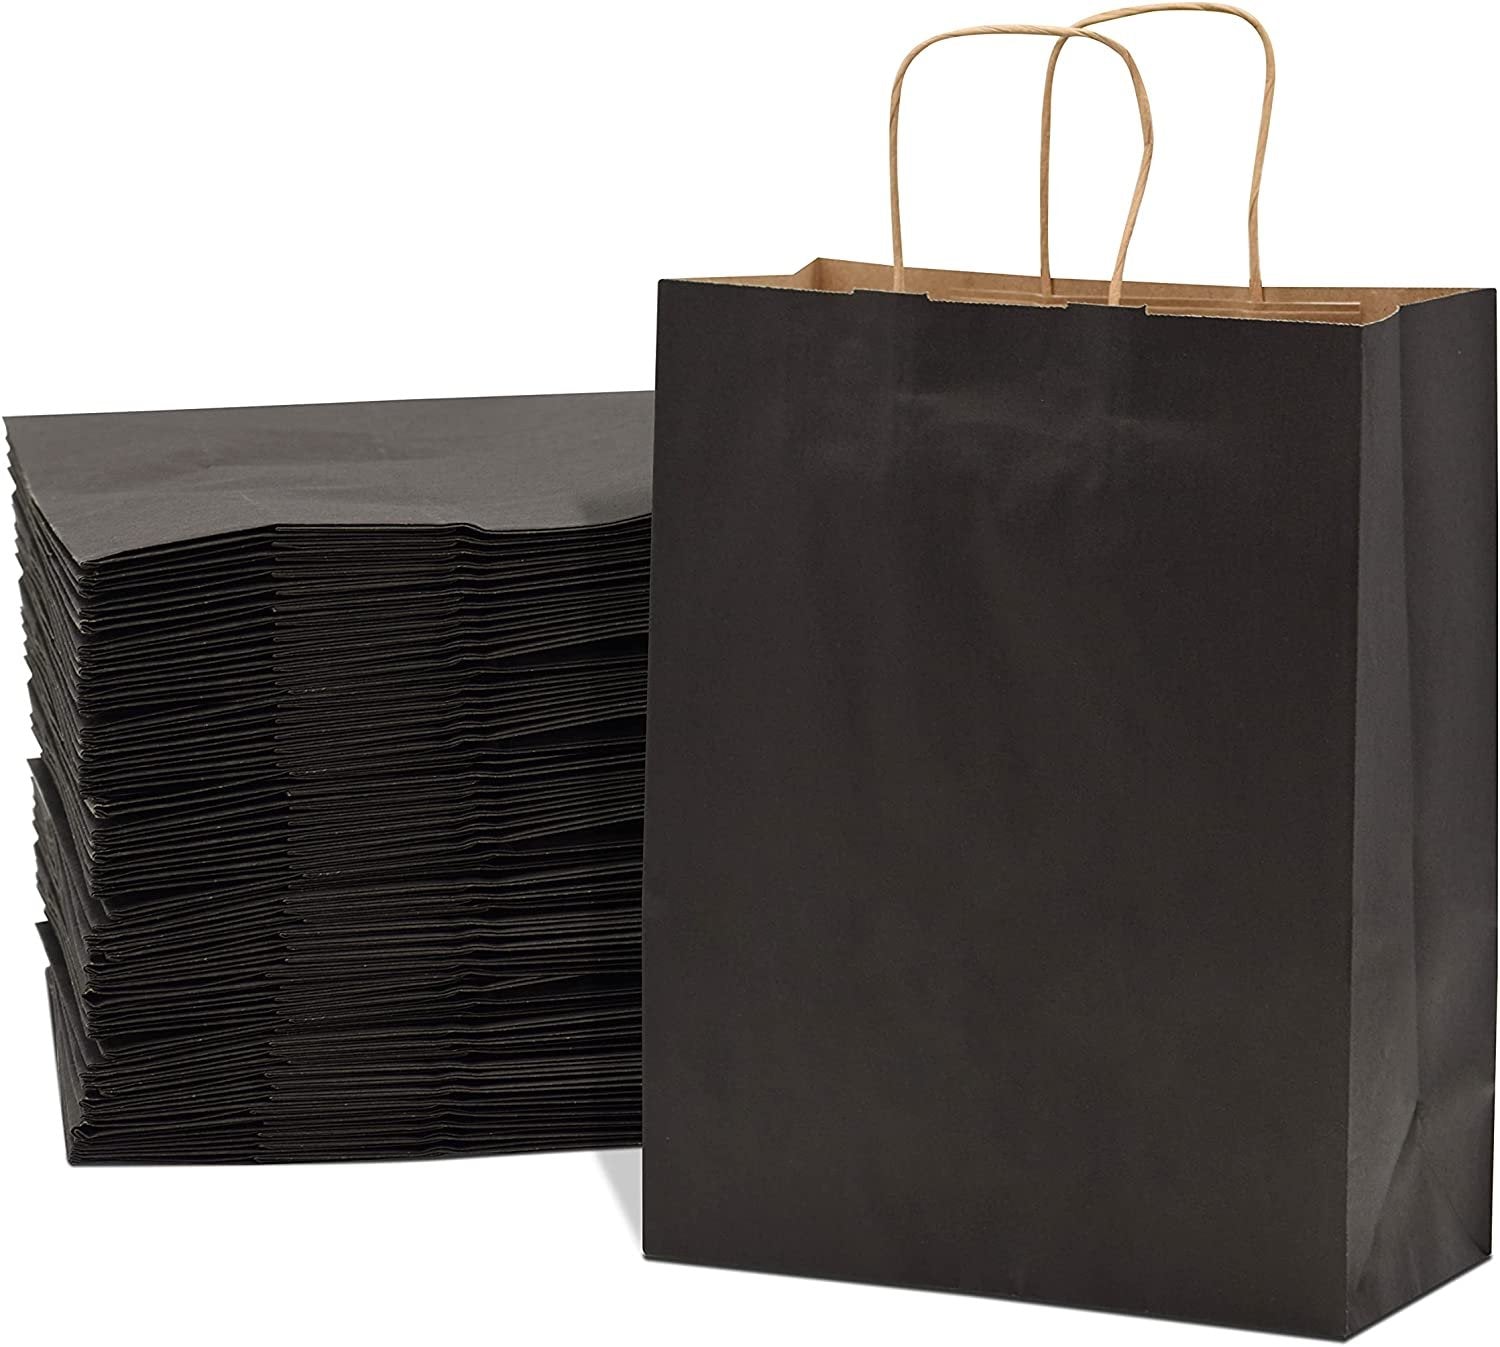 Black Gift Bags with Handles - 10x5x13 Inch 100 Pack Medium Kraft Paper Shopping Bags, Craft Totes in Bulk for Boutiques, Small Business, Retail Stores, Birthdays, Party Favors, Jewelry, Merchandise